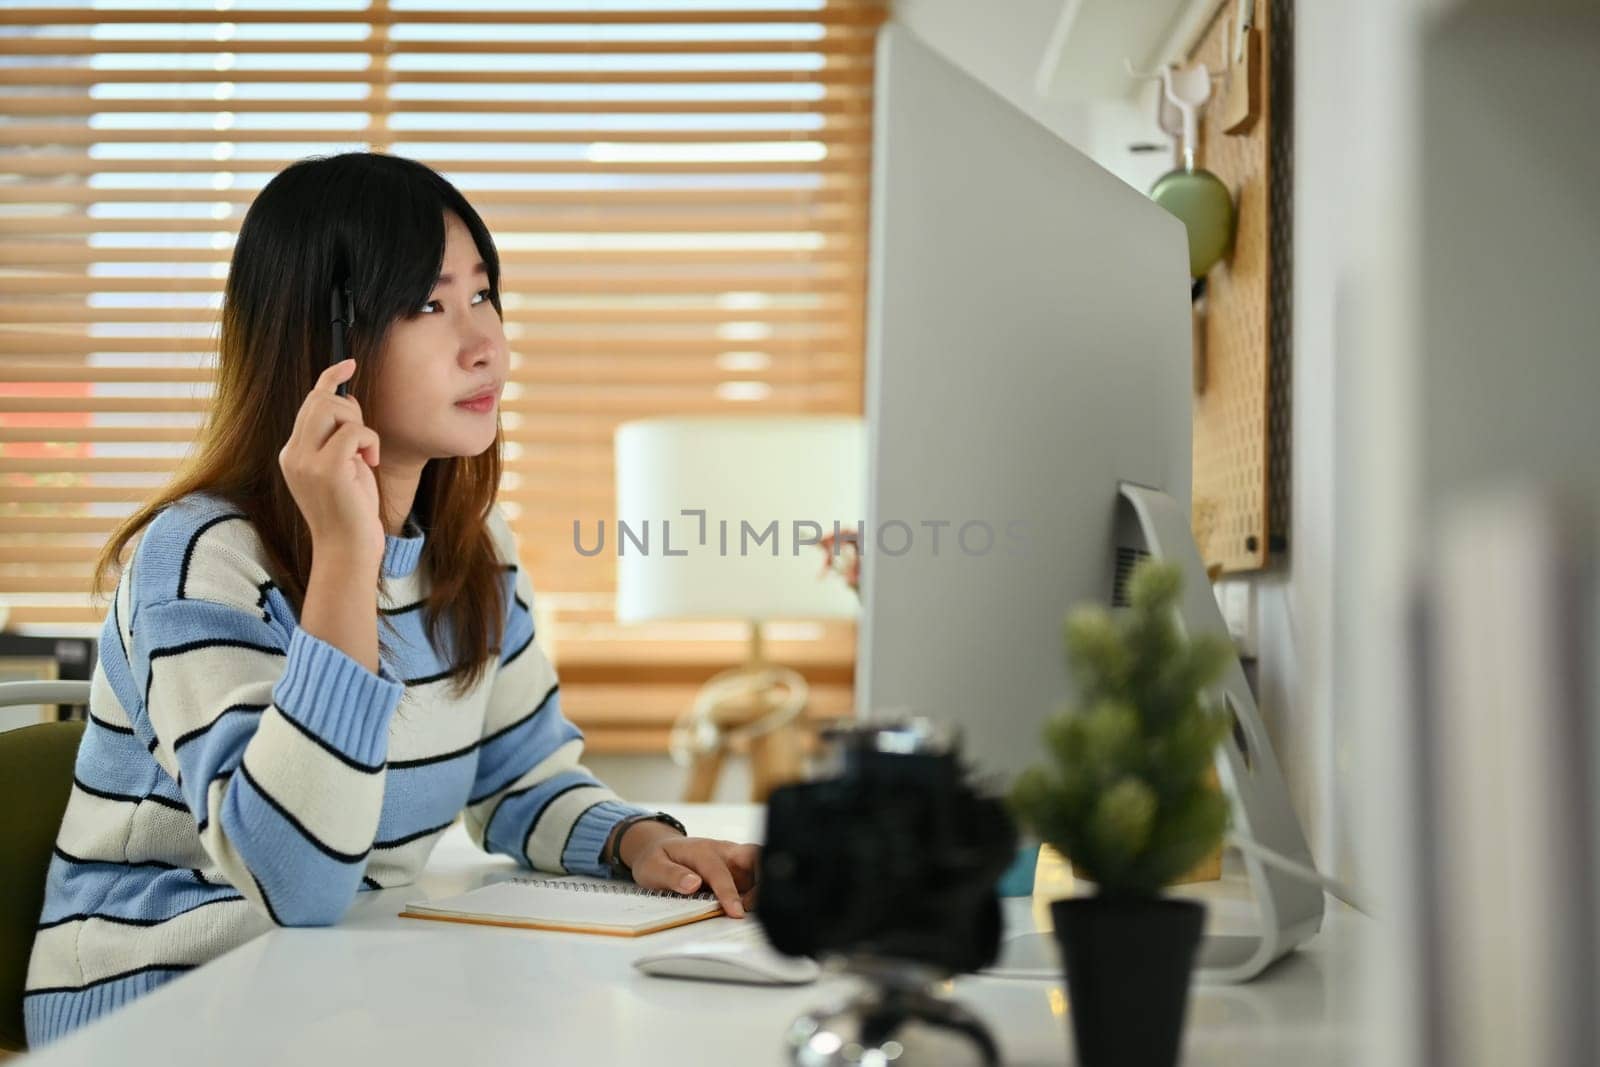 Focused young Asian woman using computer at home office.